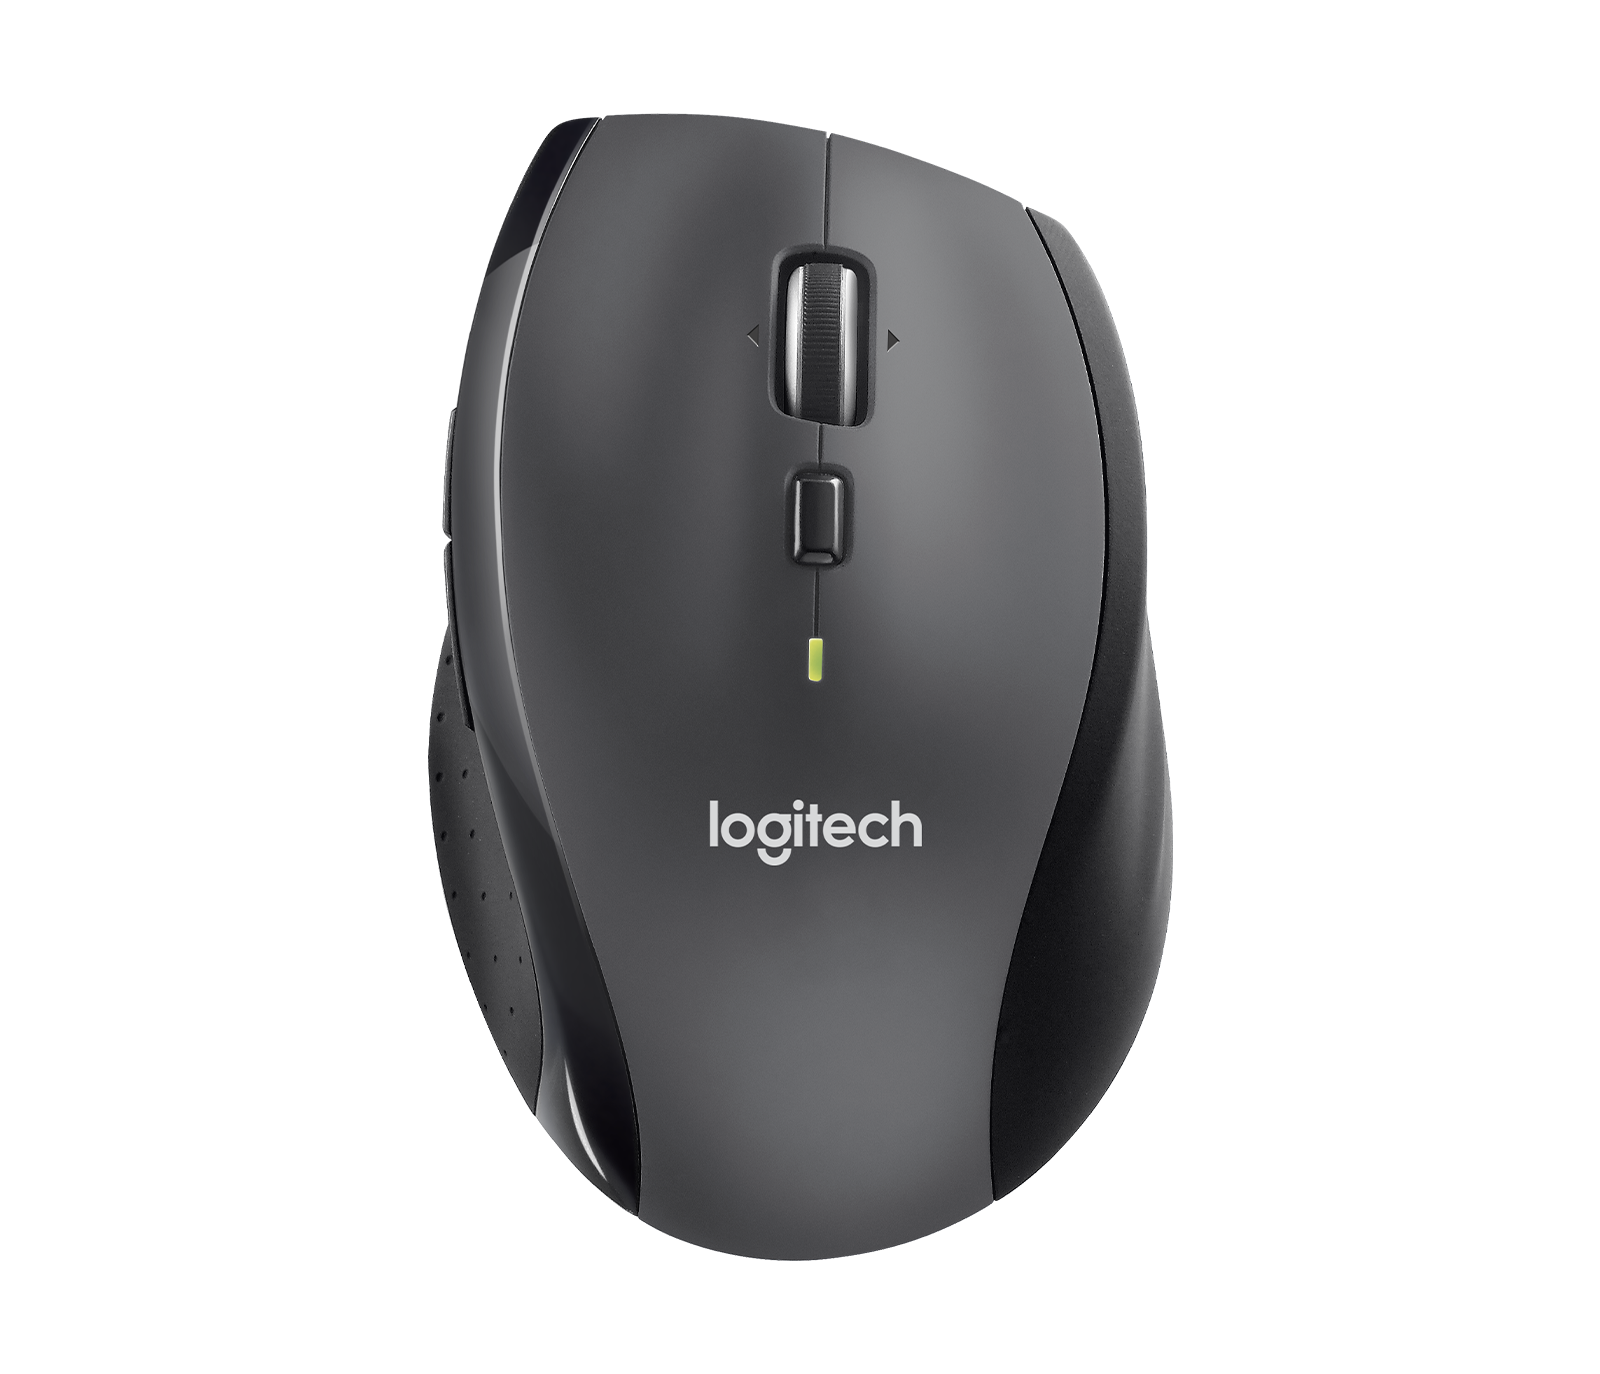 Dolke acceleration Insister Logitech M705 Marathon Wireless Mouse with 3Y Battery Life